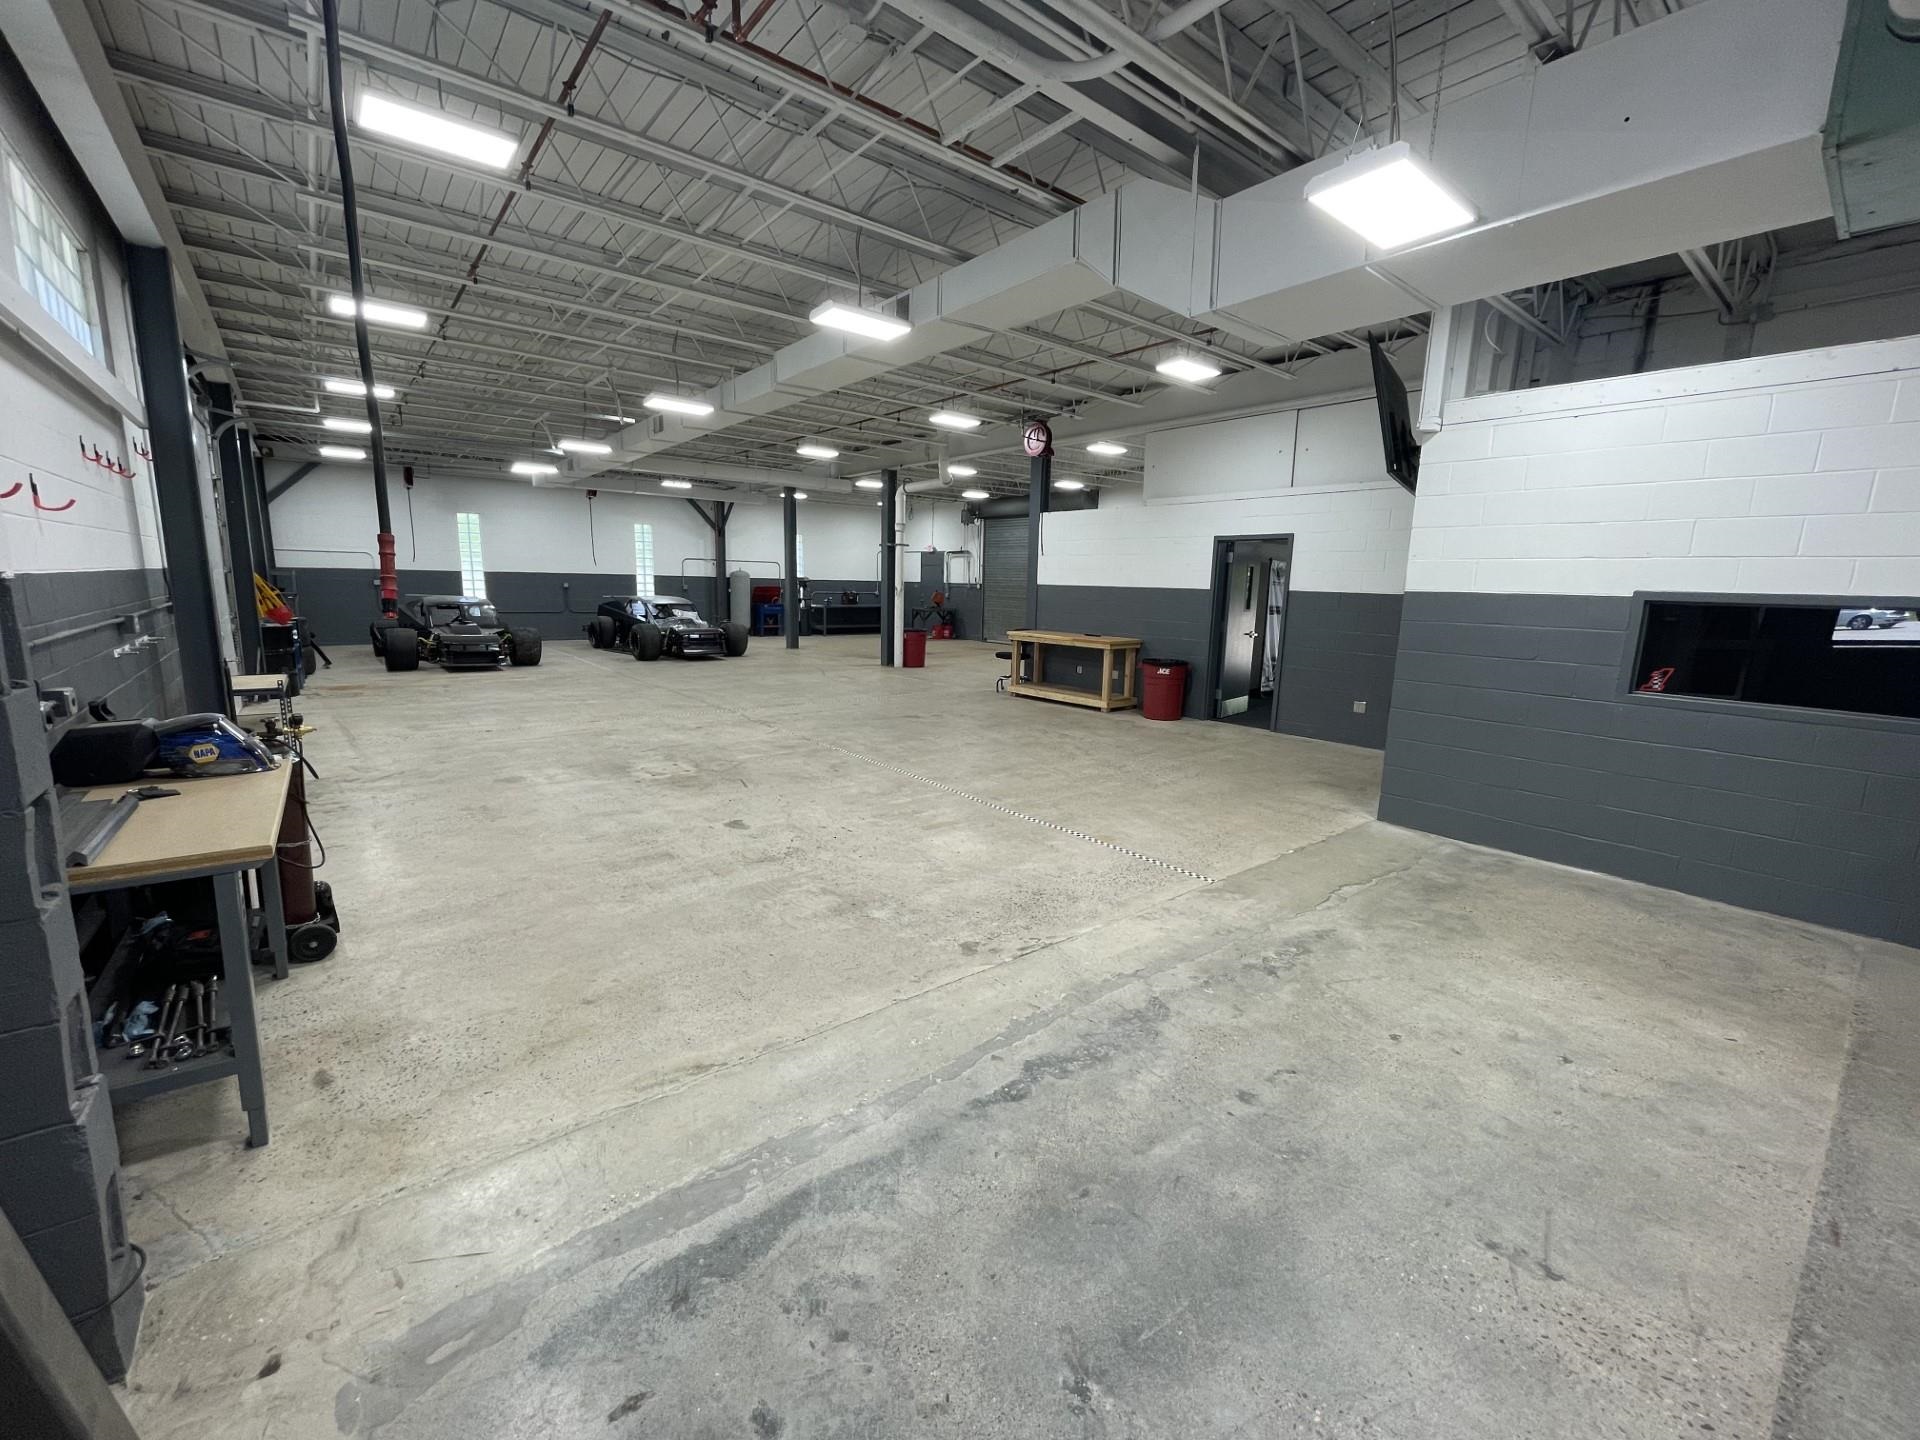 4600 SF of ground and polished concrete floors